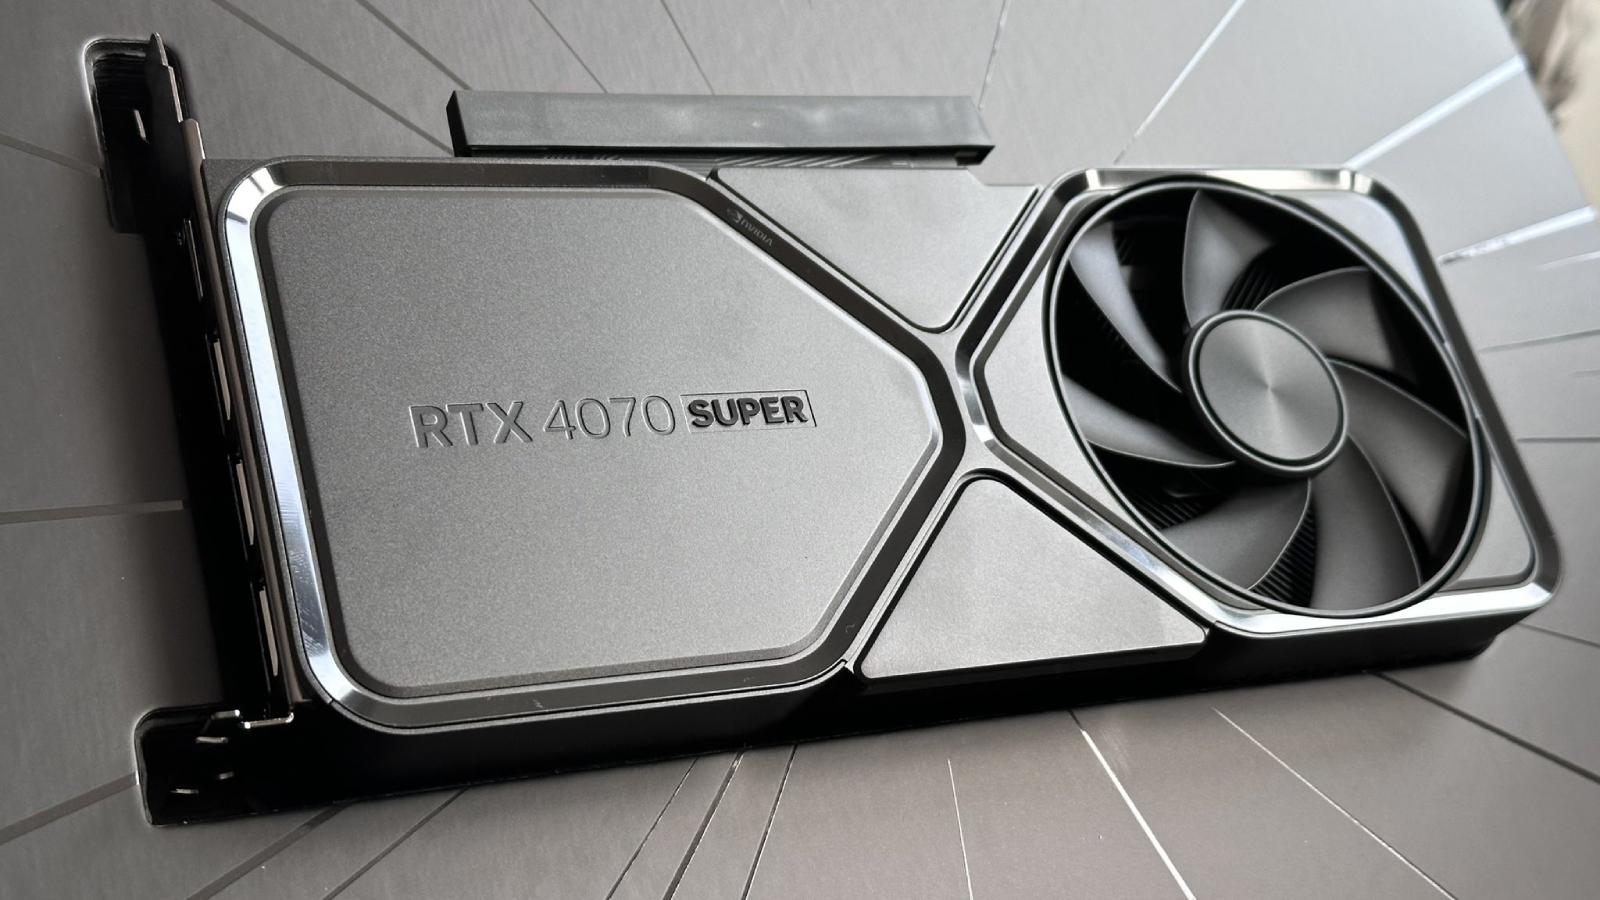 NVIDIA GeForce RTX 4070 SUPER 12 GB Graphics Card Leaks Out